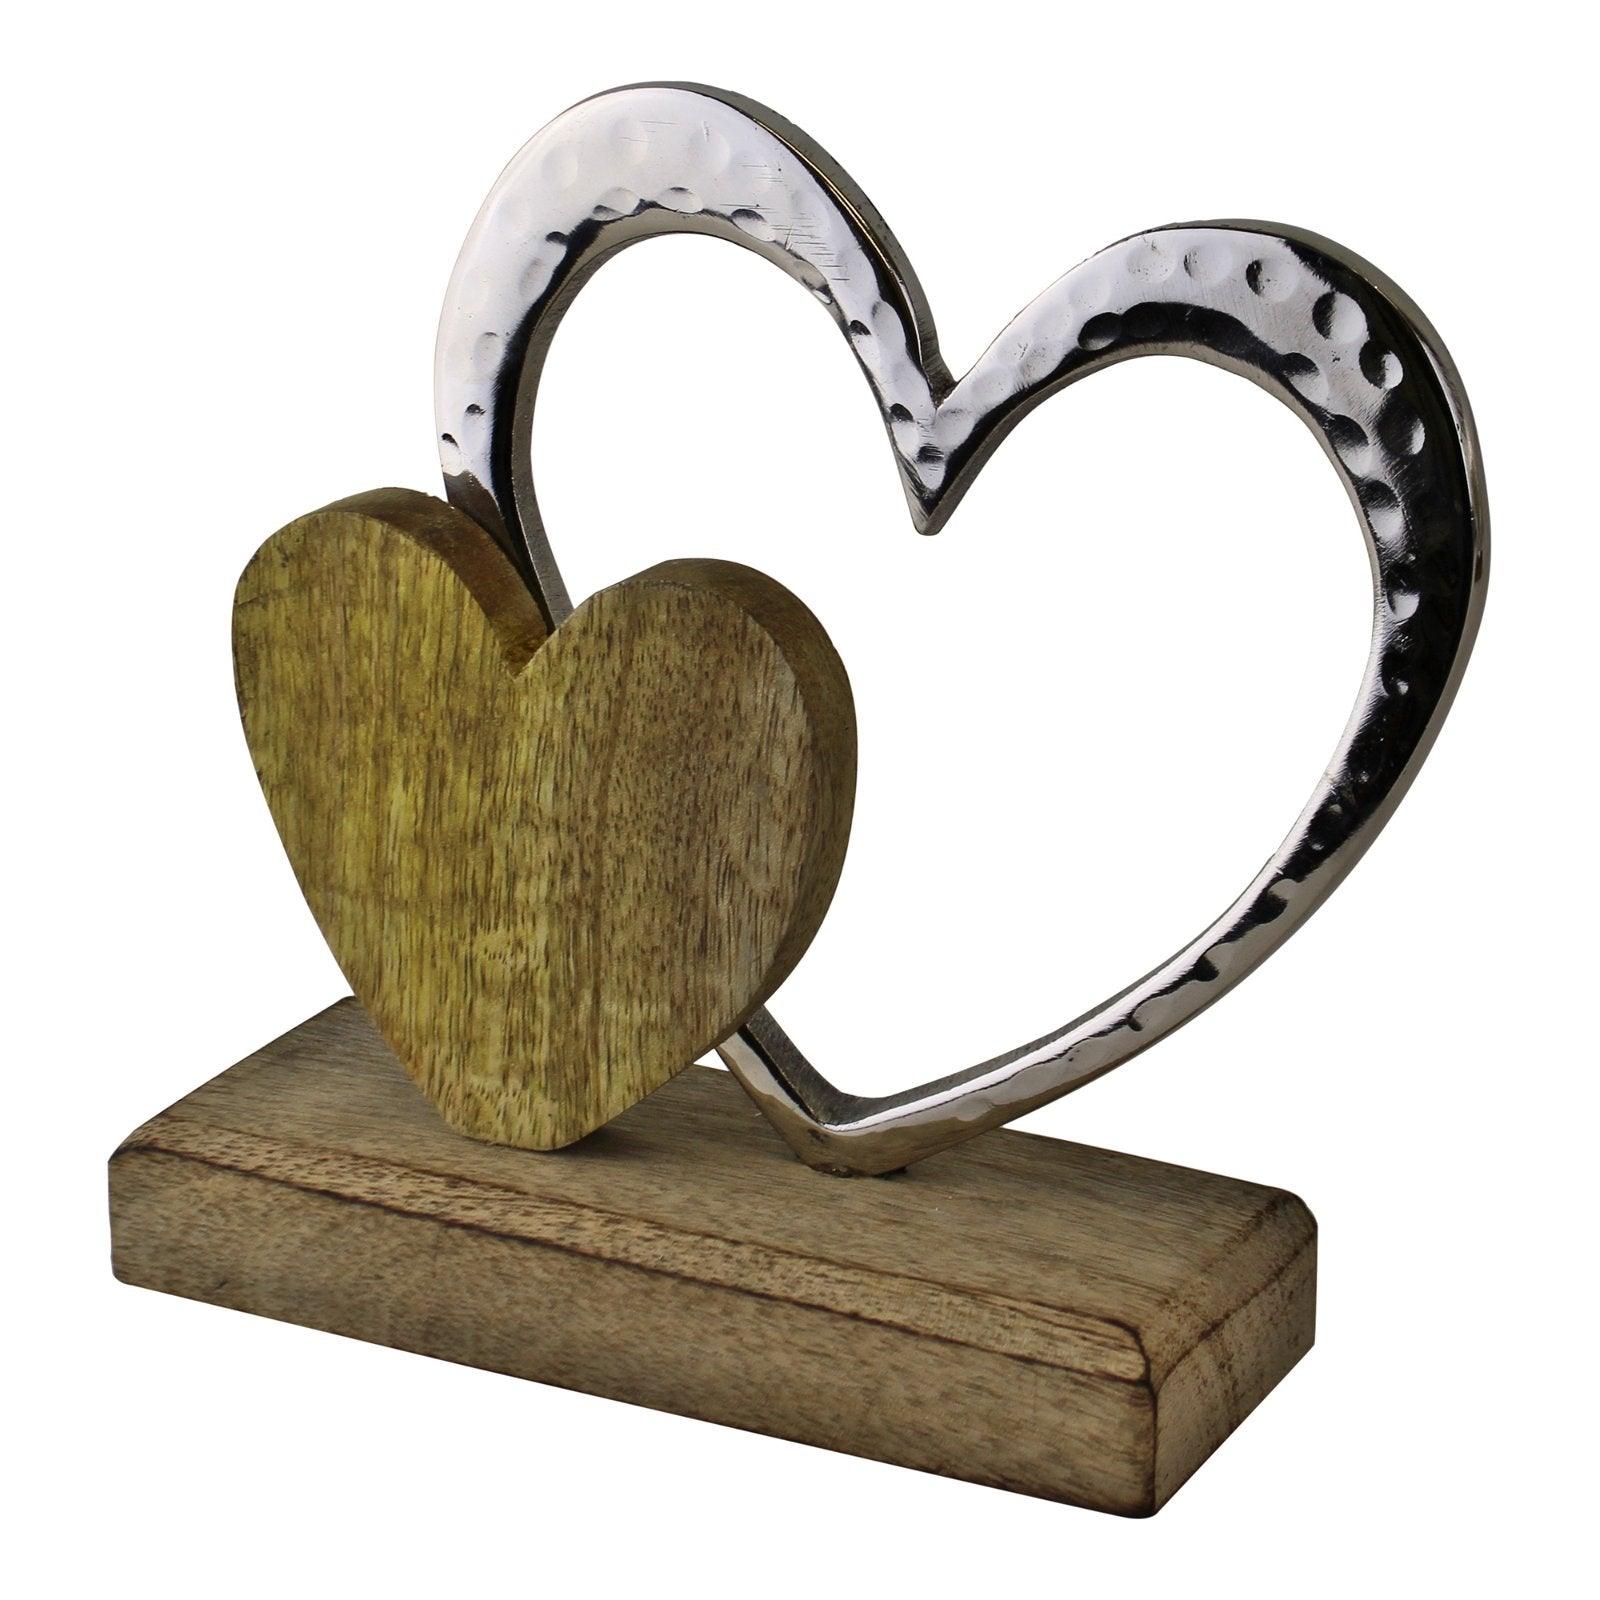 View Small Double Heart On Wooden Base Ornament information